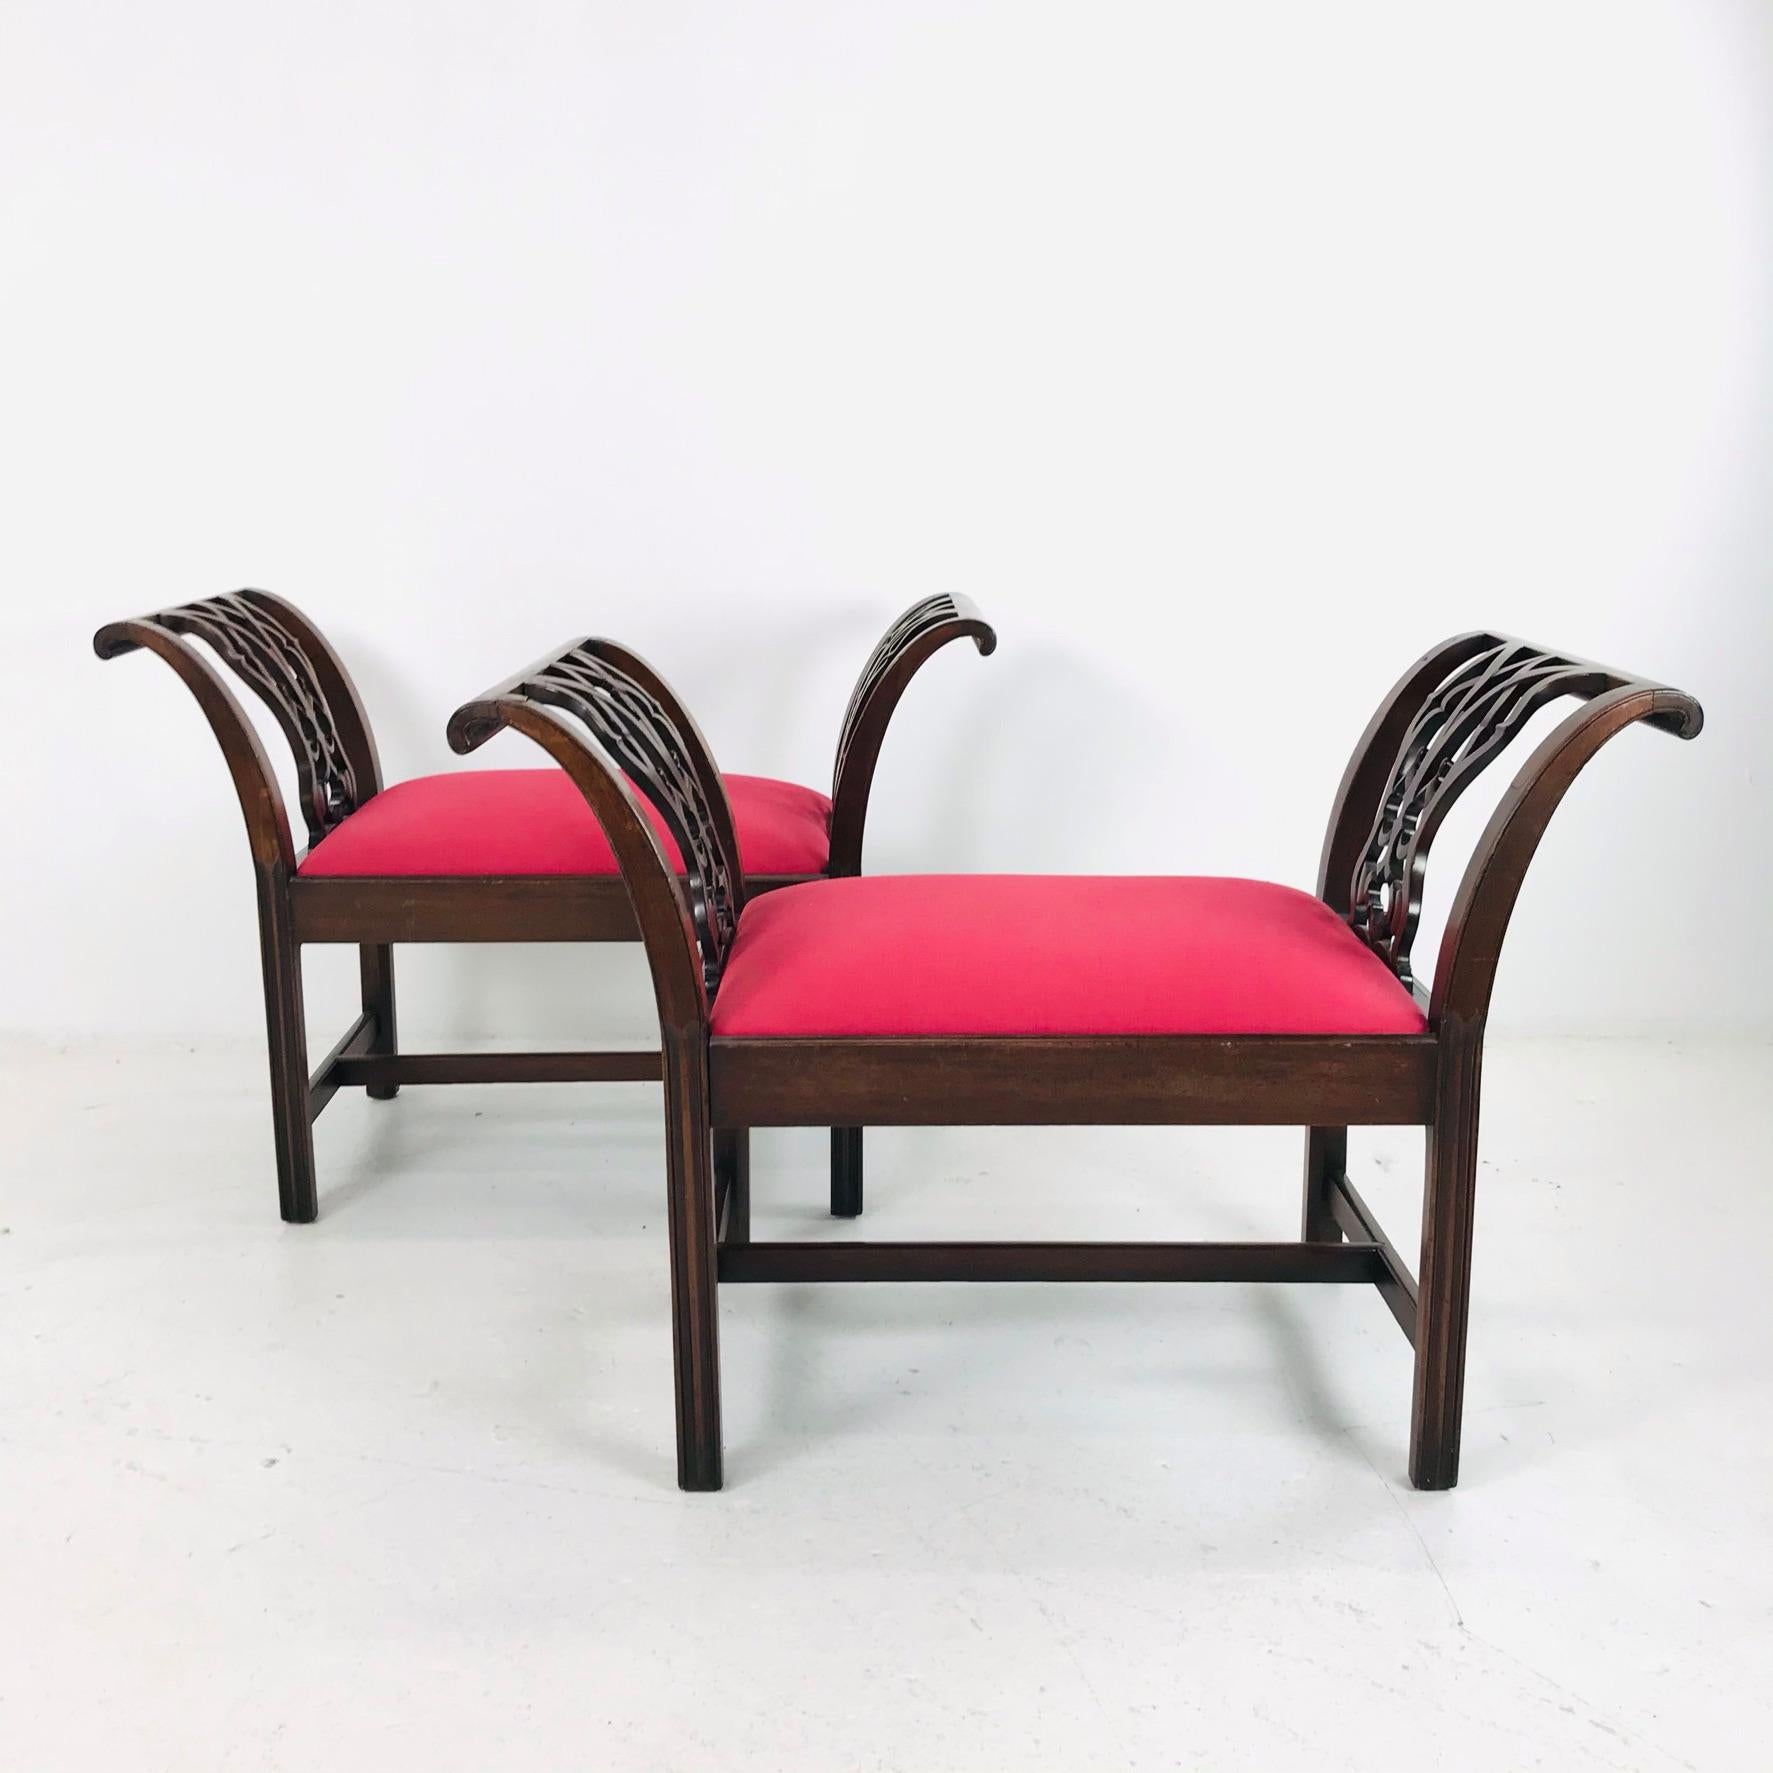 Beautiful, rare pair of 18th century carved mahogany Chippendale window seats / Benches. Some restoration is needed.